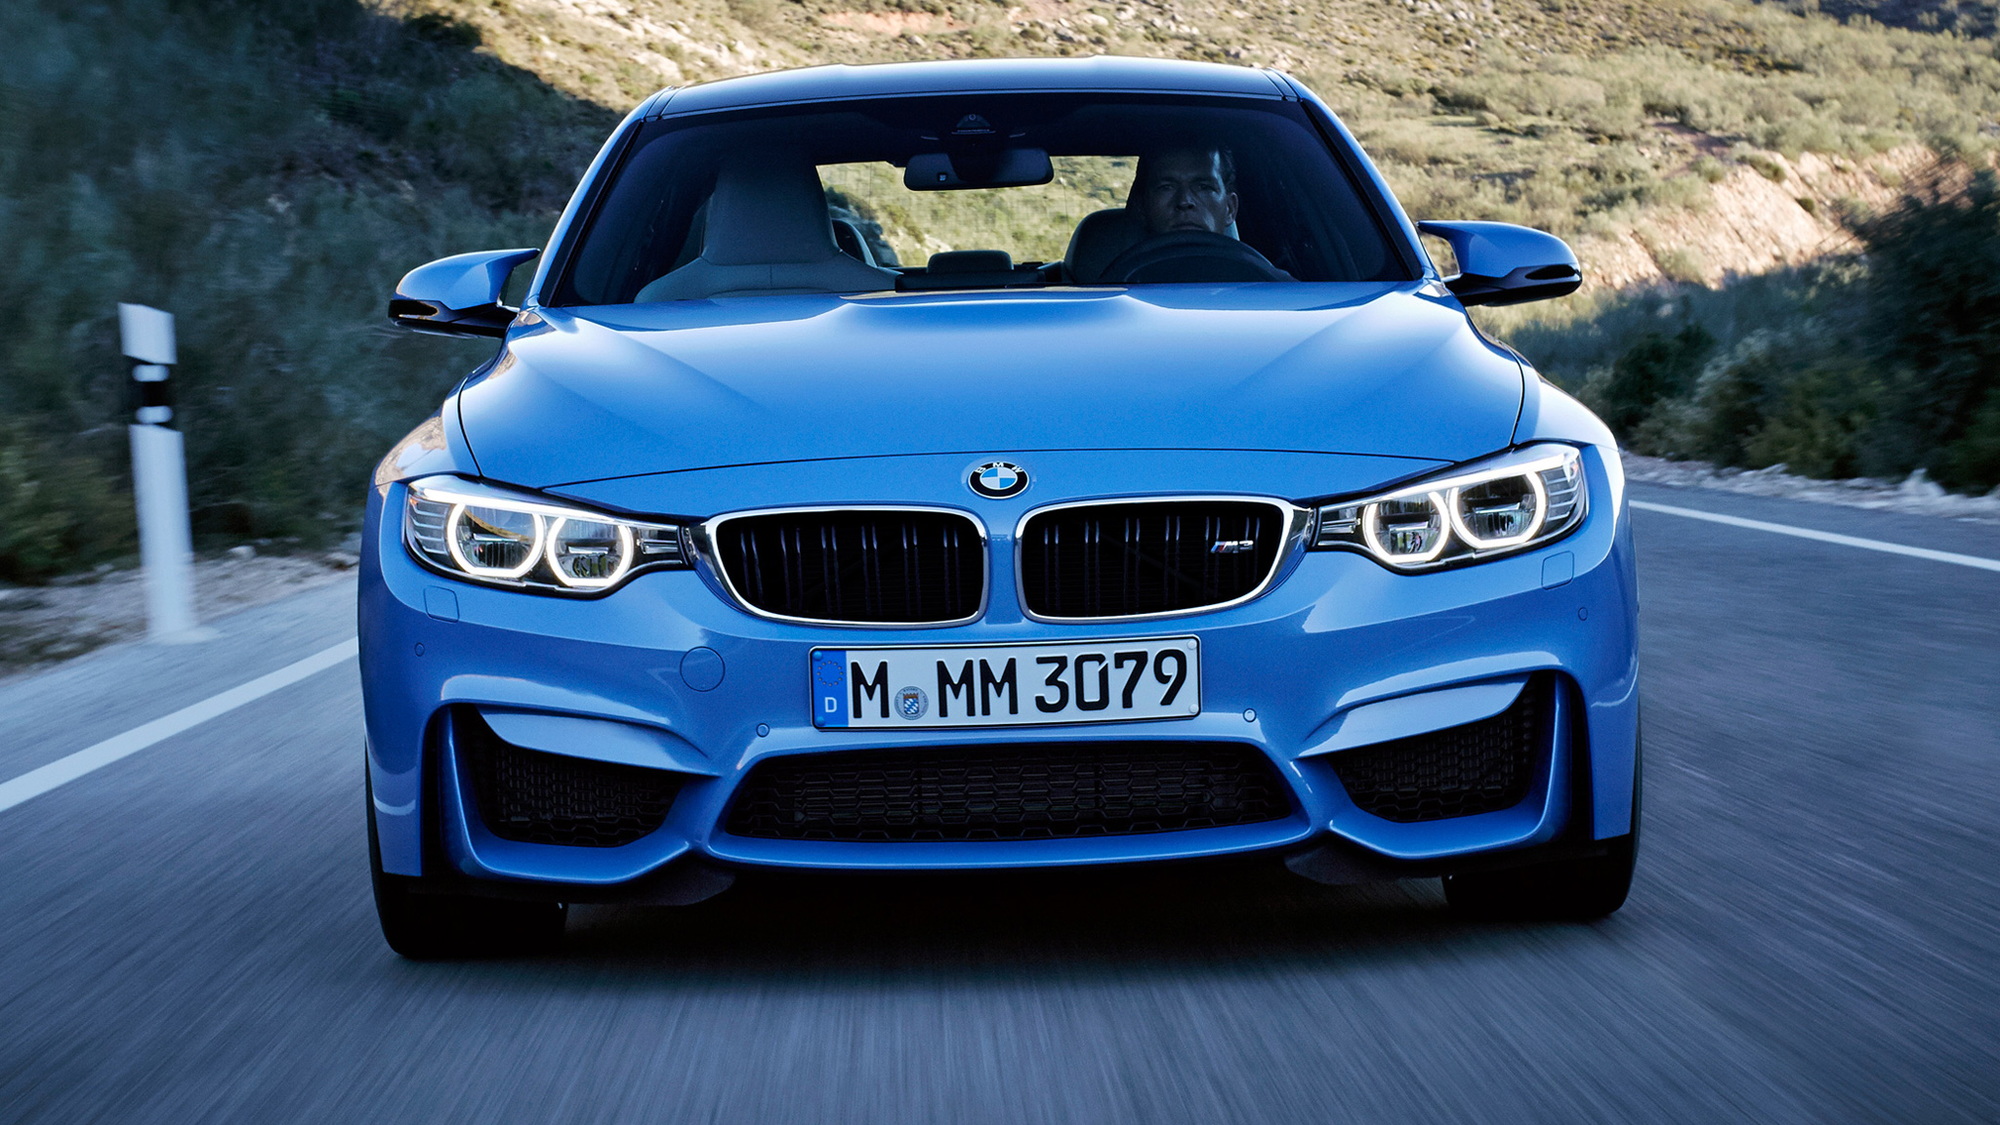 2015 BMW M3 leaked images